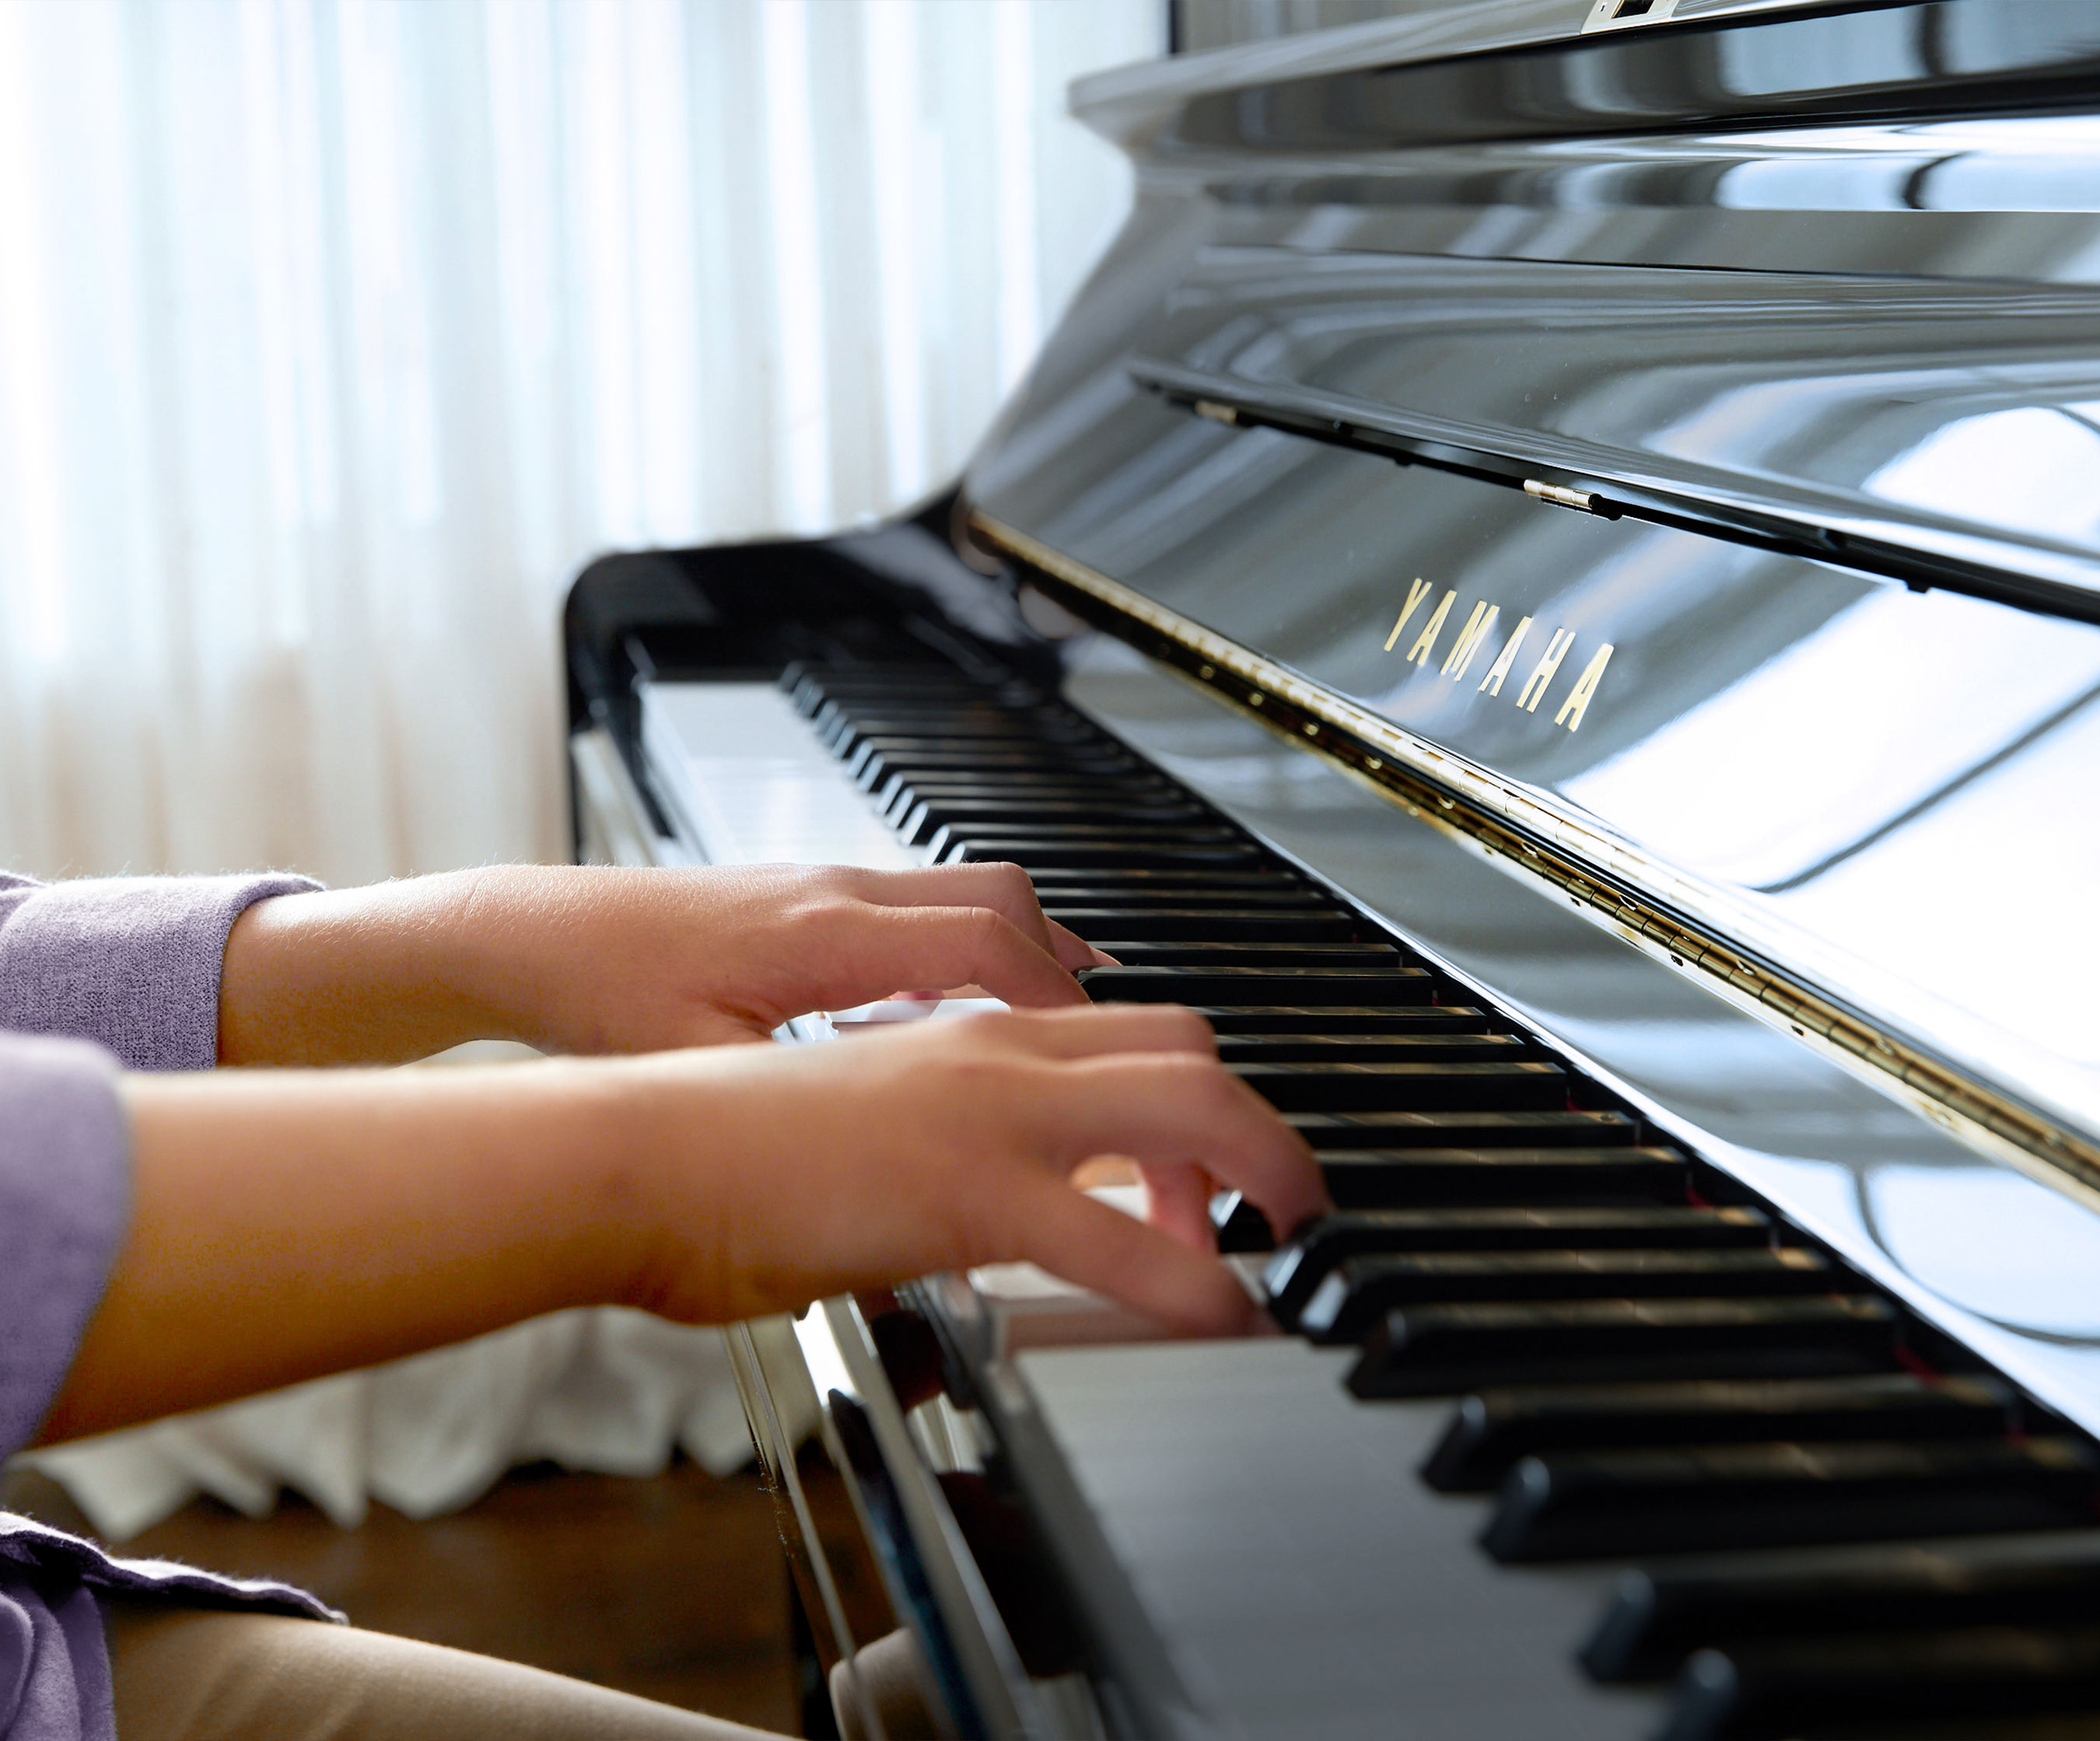 Visit YamahaPianos.com to find the right piano for your home and learn more about 0% APR financing for 18 months on select pianos